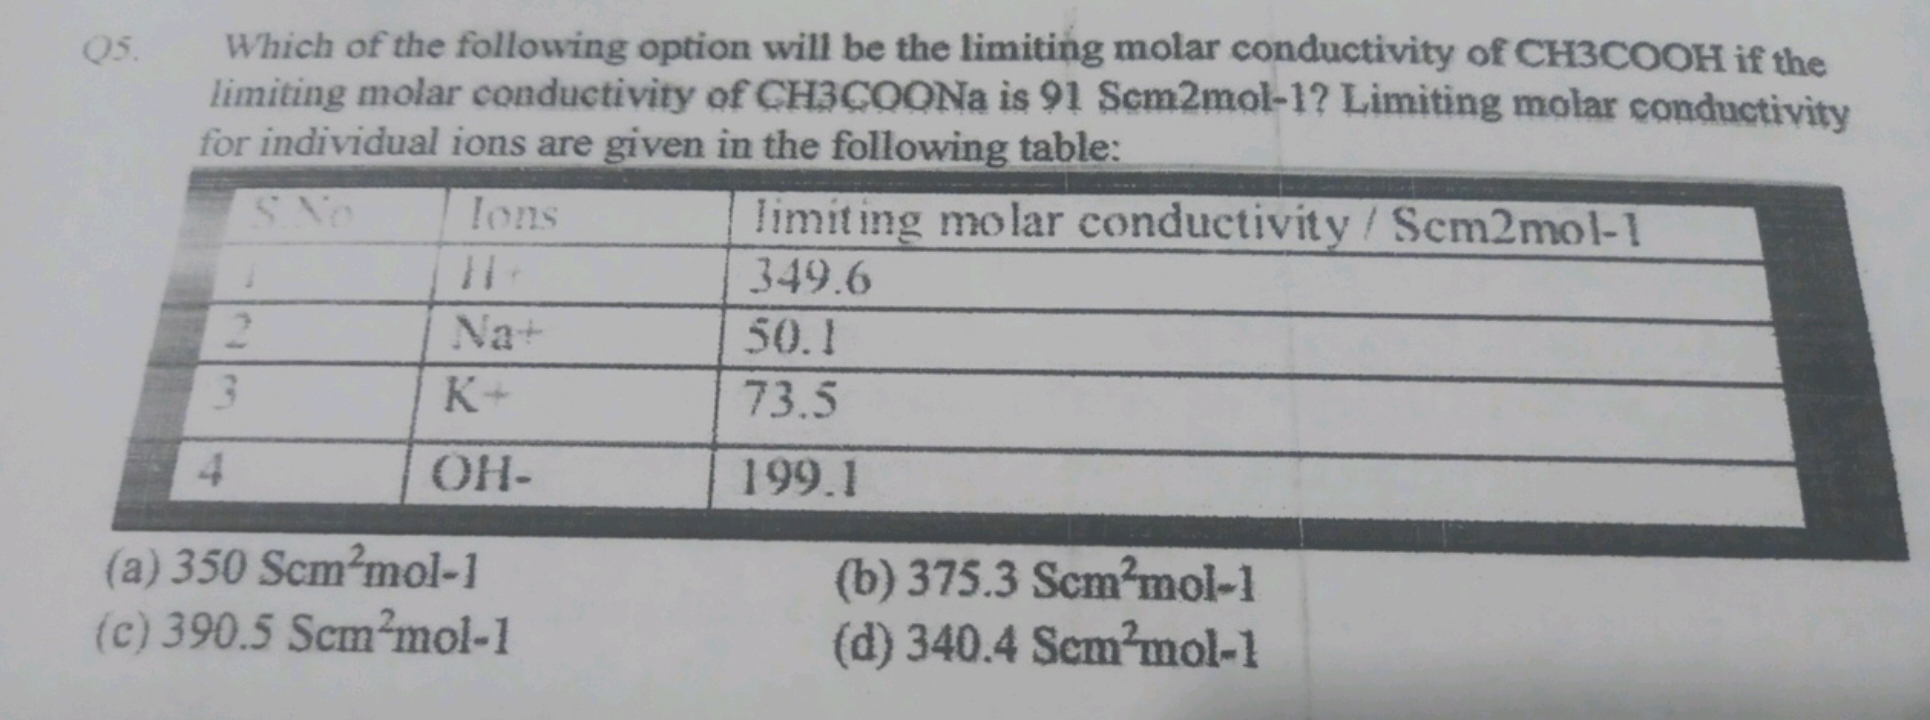 Q5. Which of the following option will be the limiting molar conductiv